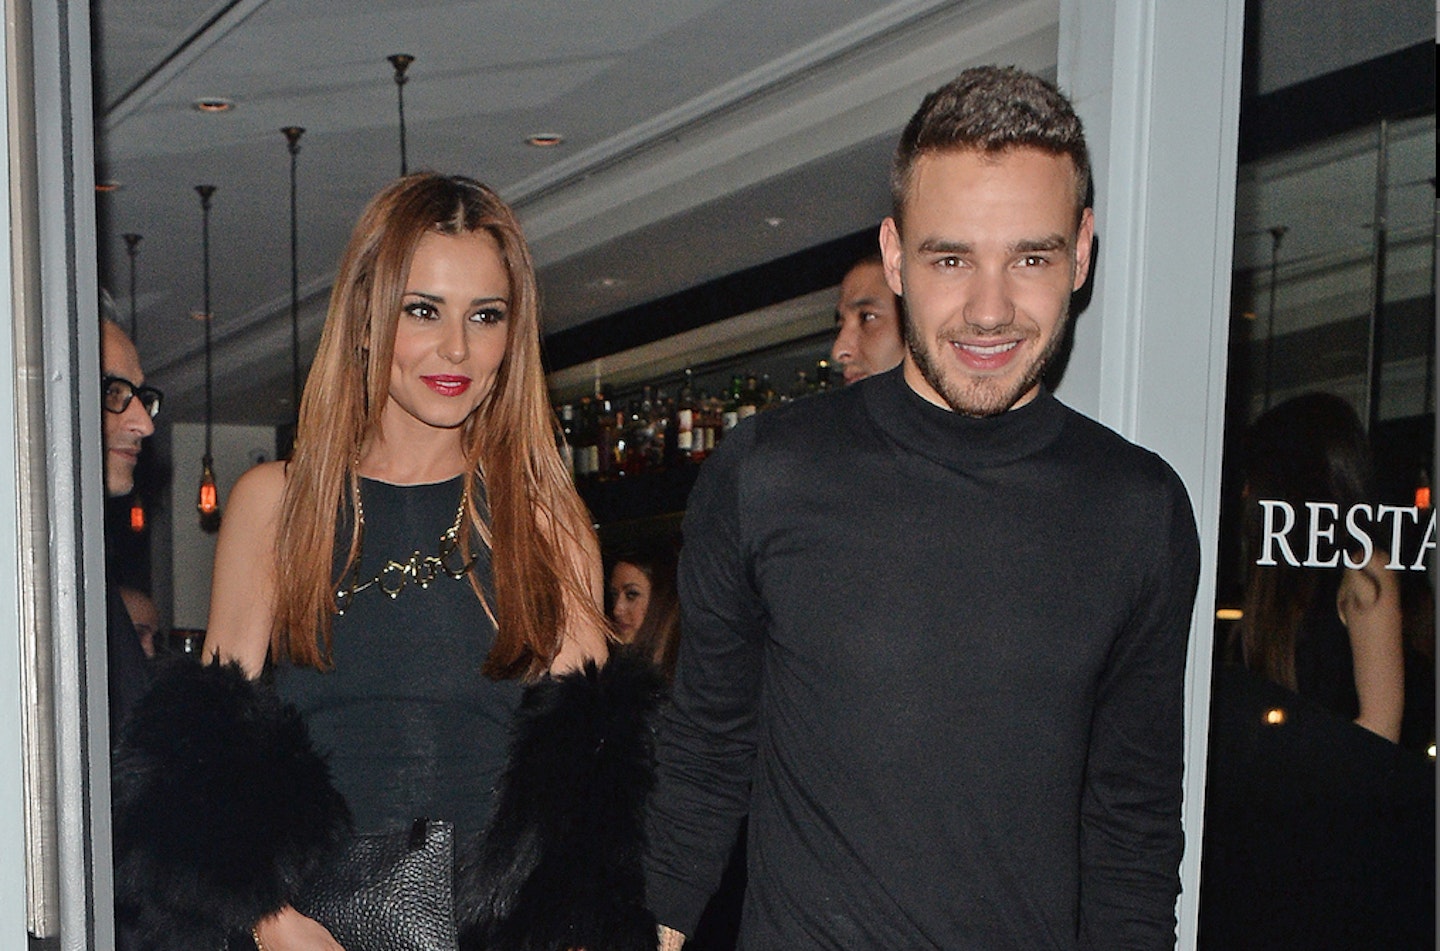 Cheryl on a date with Liam Payne